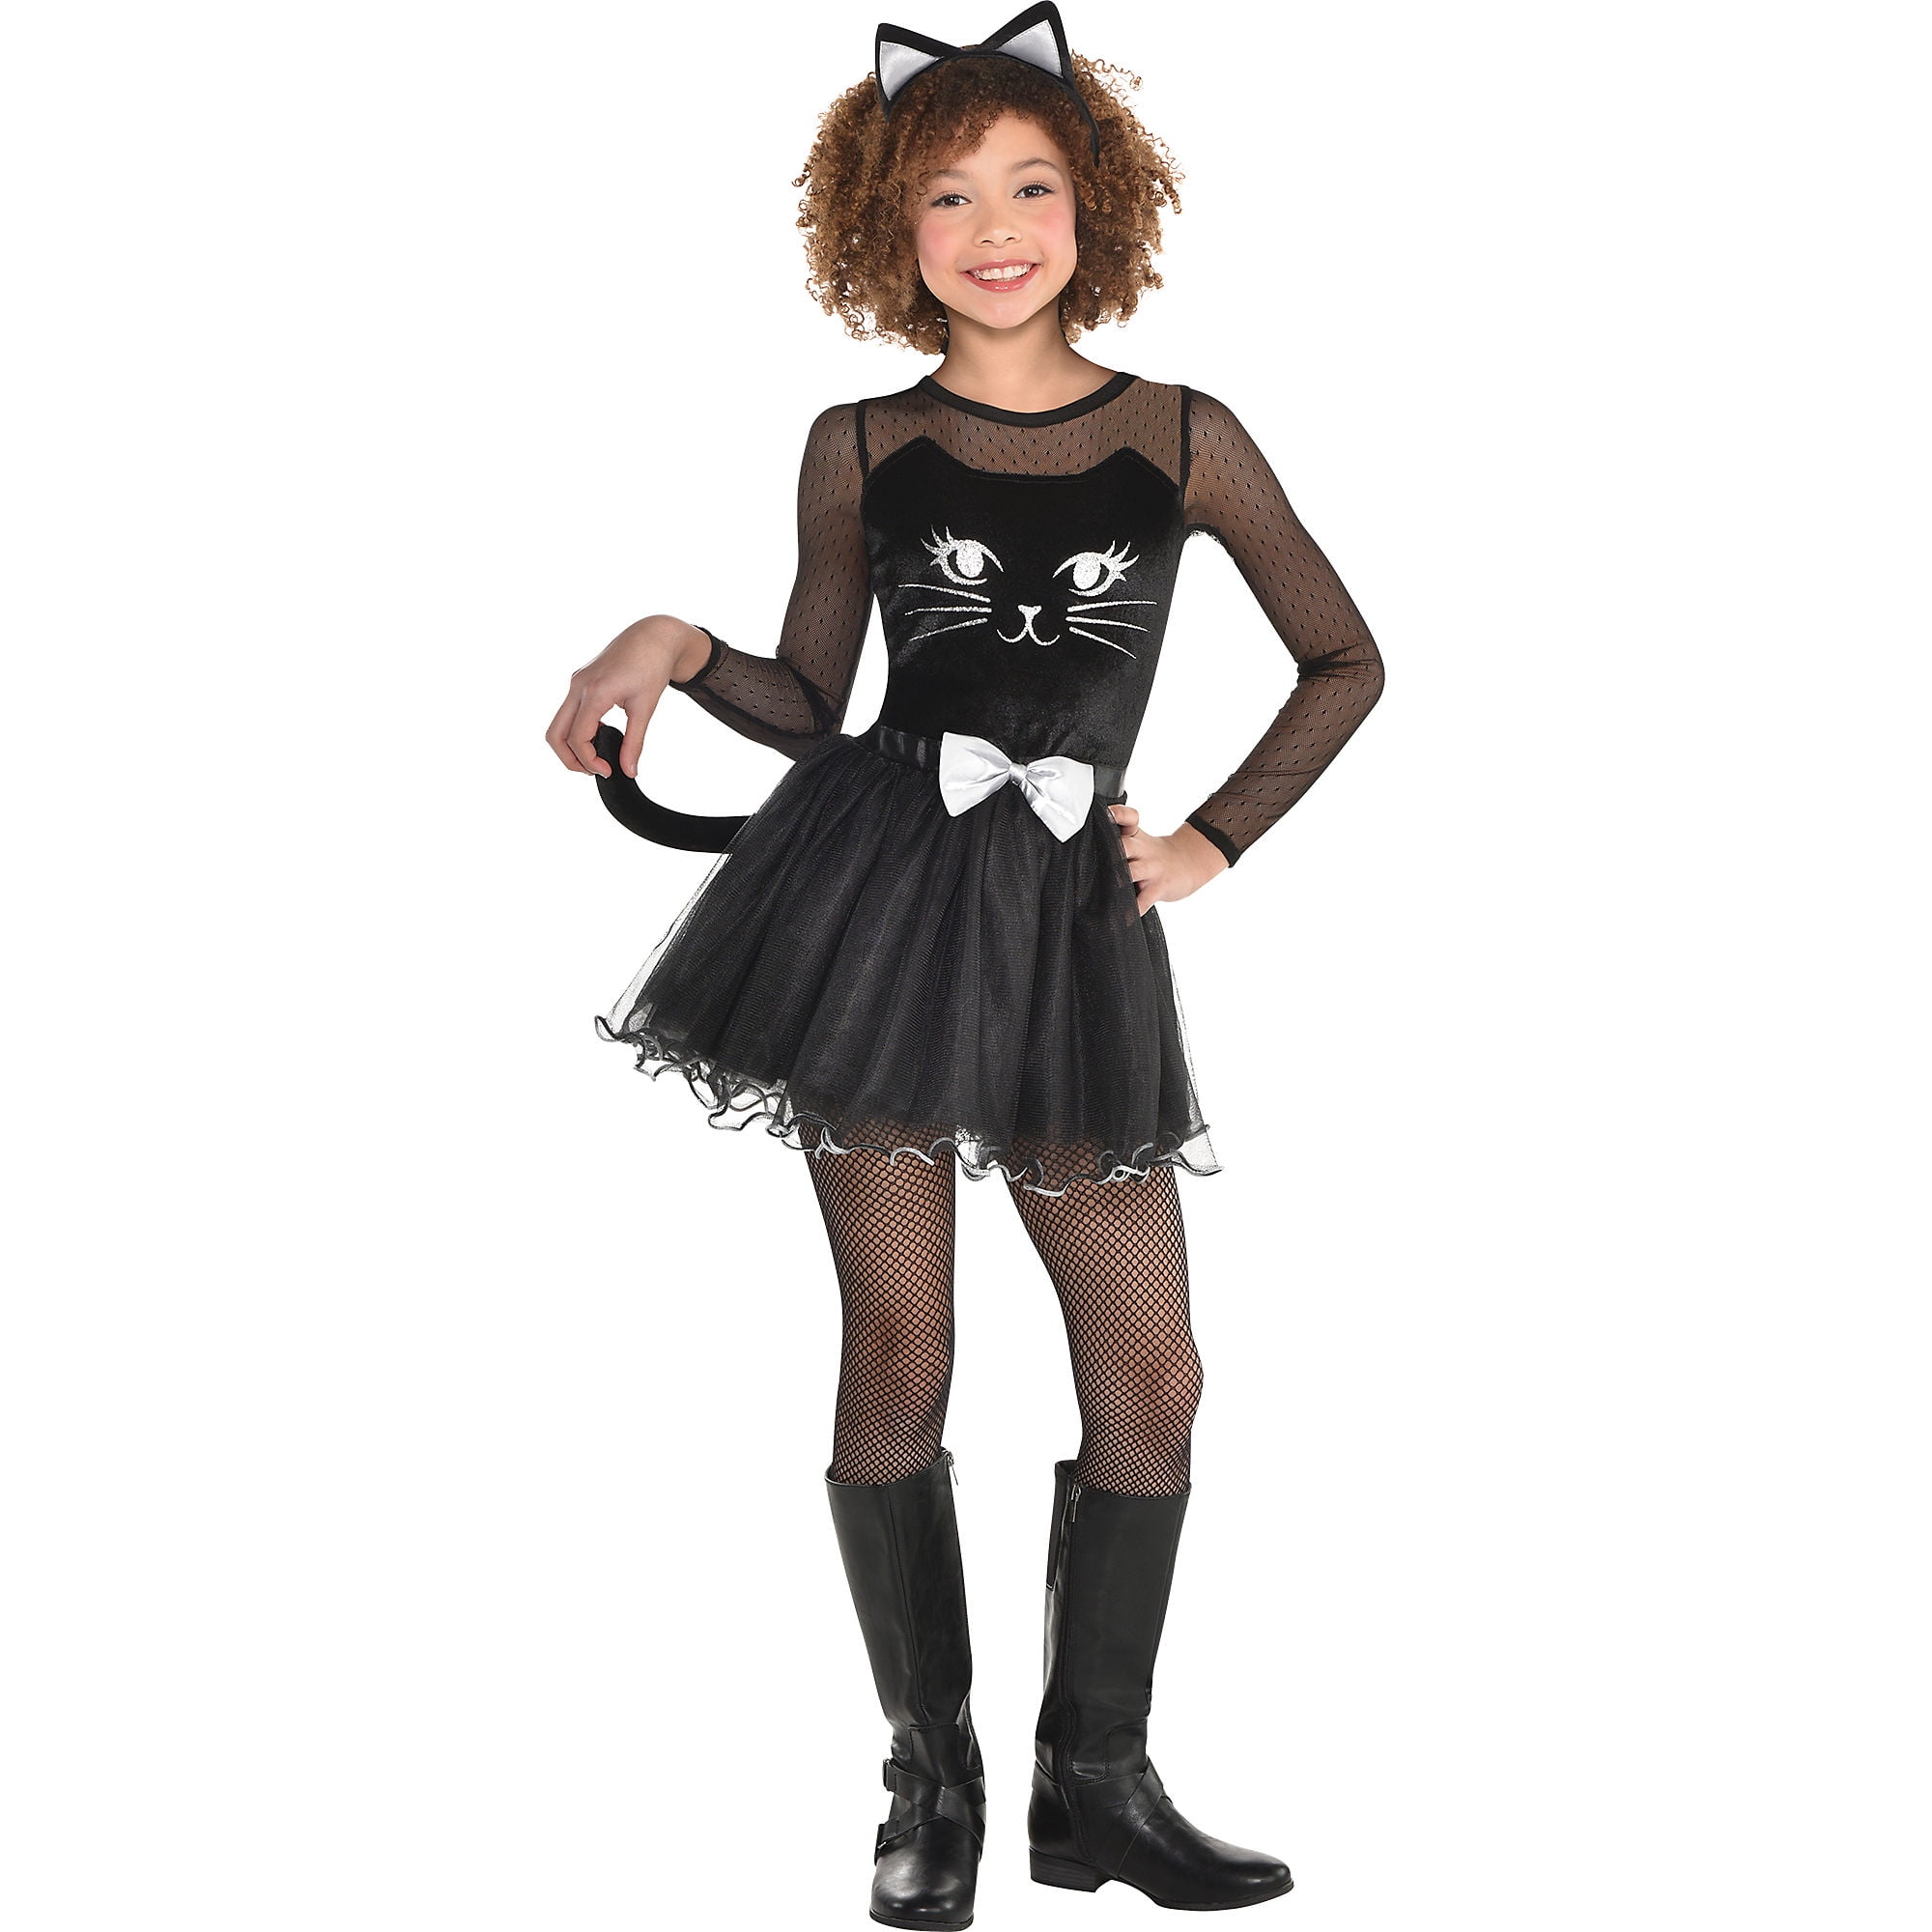 Your little one will be the coolest cat at the classroom Halloween party in...